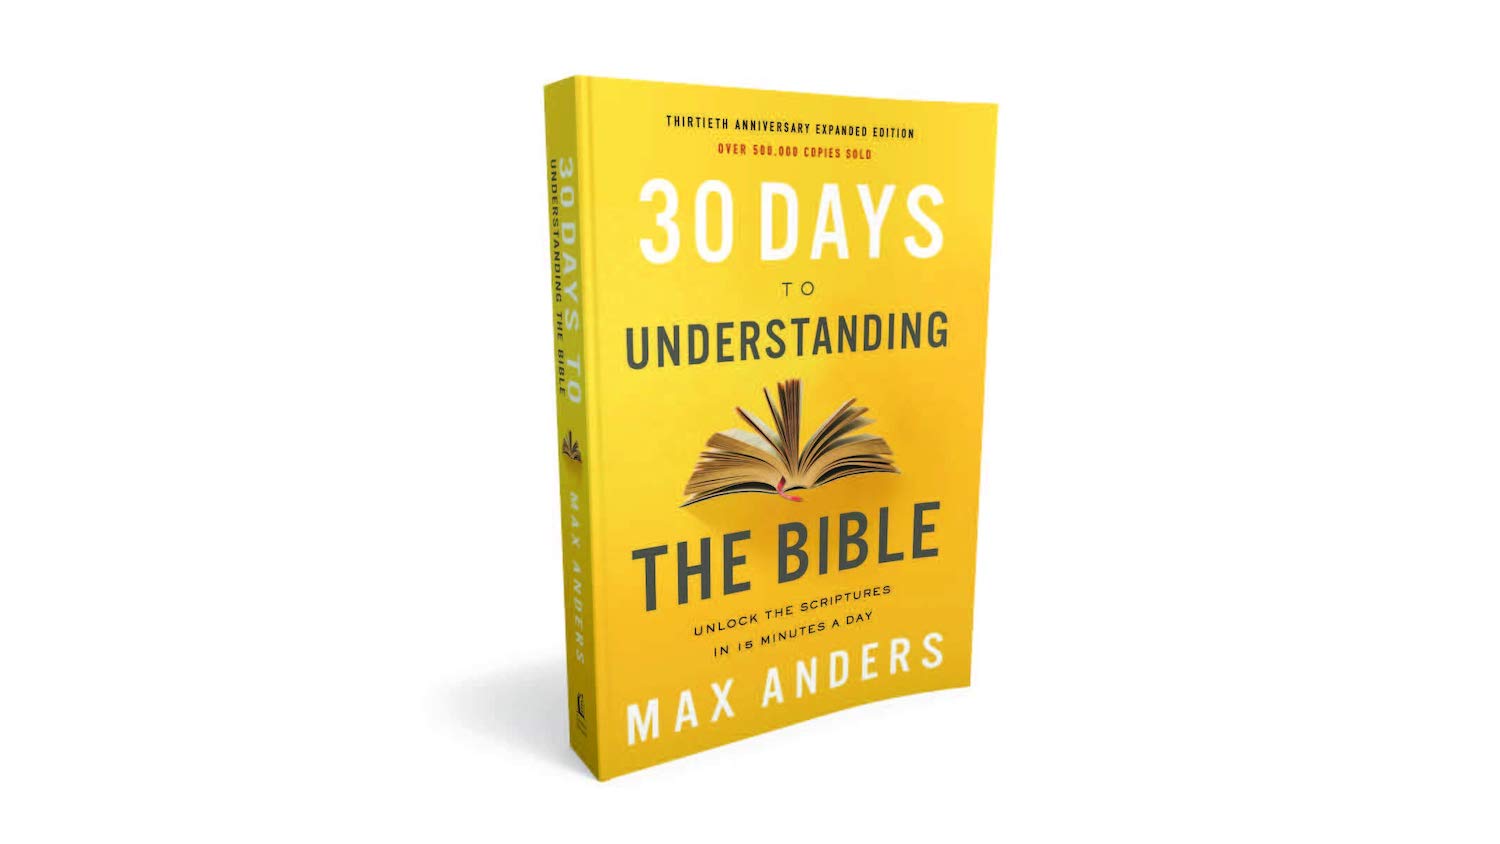 30-days-to-understanding-the-bible-thomas-nelson-bibles-max-anders